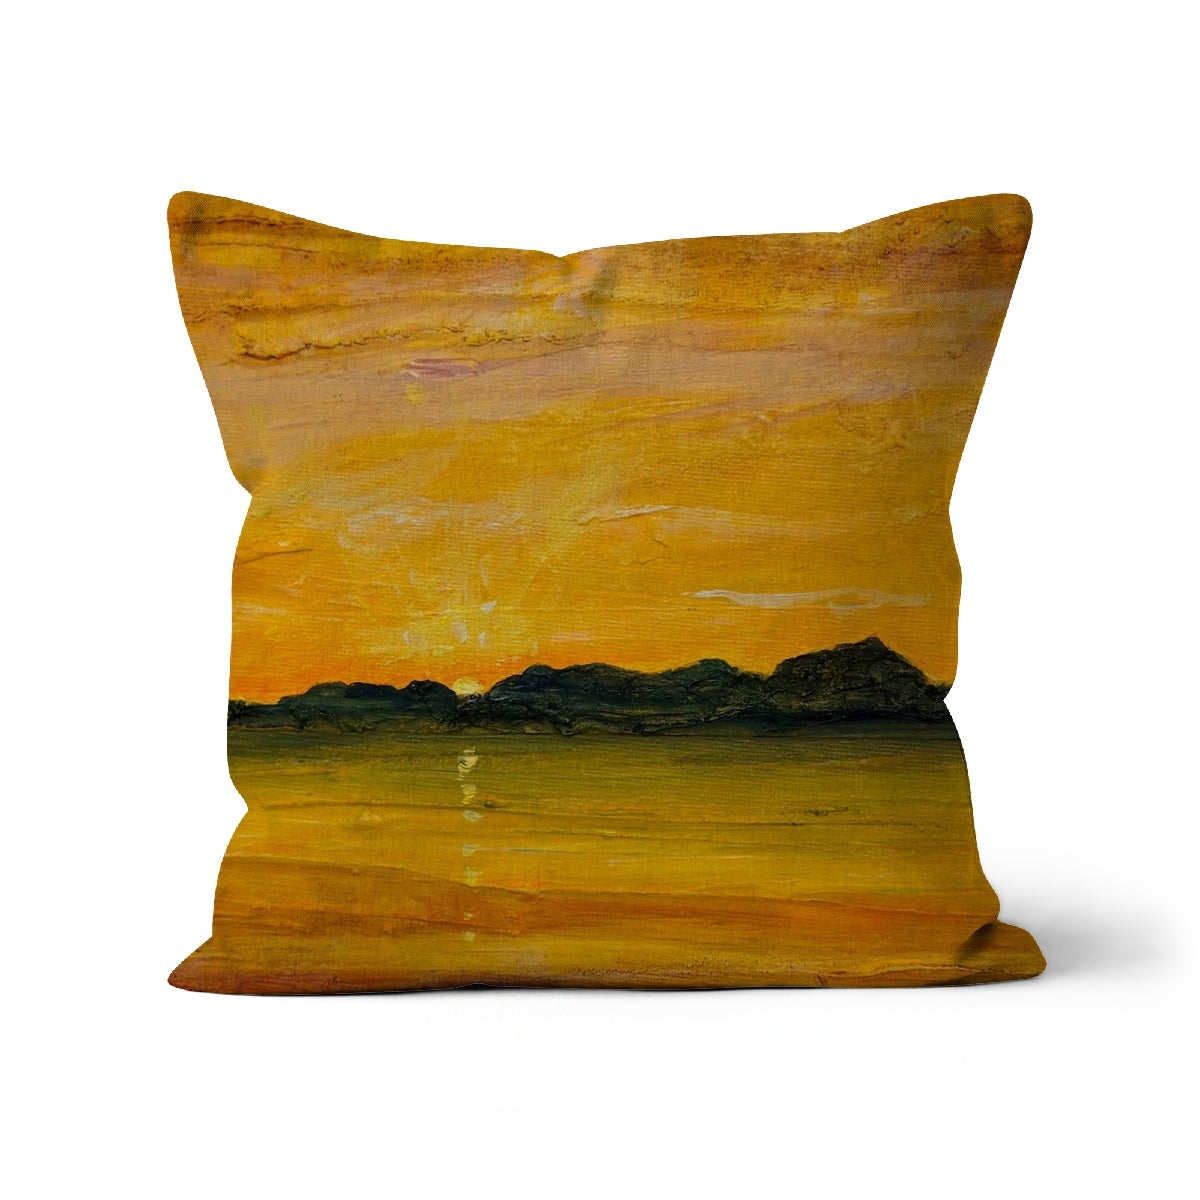 Jura Sunset Art Gifts Cushion-Cushions-Hebridean Islands Art Gallery-Canvas-24"x24"-Paintings, Prints, Homeware, Art Gifts From Scotland By Scottish Artist Kevin Hunter